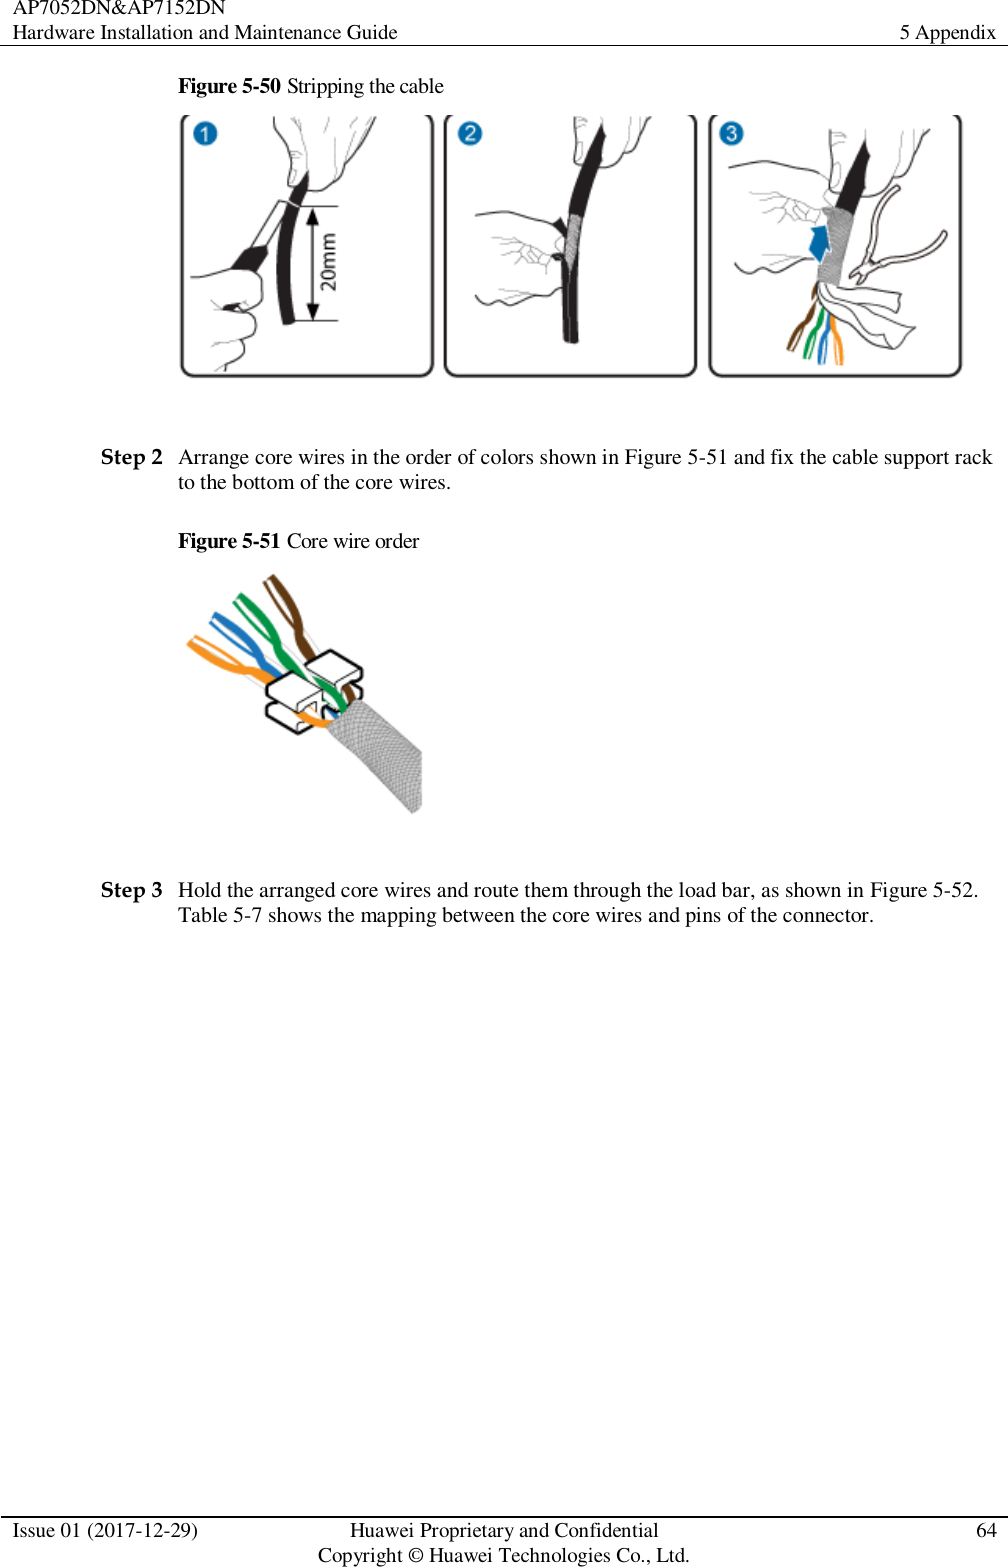 AP7052DN&amp;AP7152DN Hardware Installation and Maintenance Guide 5 Appendix  Issue 01 (2017-12-29) Huawei Proprietary and Confidential                                     Copyright © Huawei Technologies Co., Ltd. 64  Figure 5-50 Stripping the cable   Step 2 Arrange core wires in the order of colors shown in Figure 5-51 and fix the cable support rack to the bottom of the core wires.   Figure 5-51 Core wire order   Step 3 Hold the arranged core wires and route them through the load bar, as shown in Figure 5-52. Table 5-7 shows the mapping between the core wires and pins of the connector. 